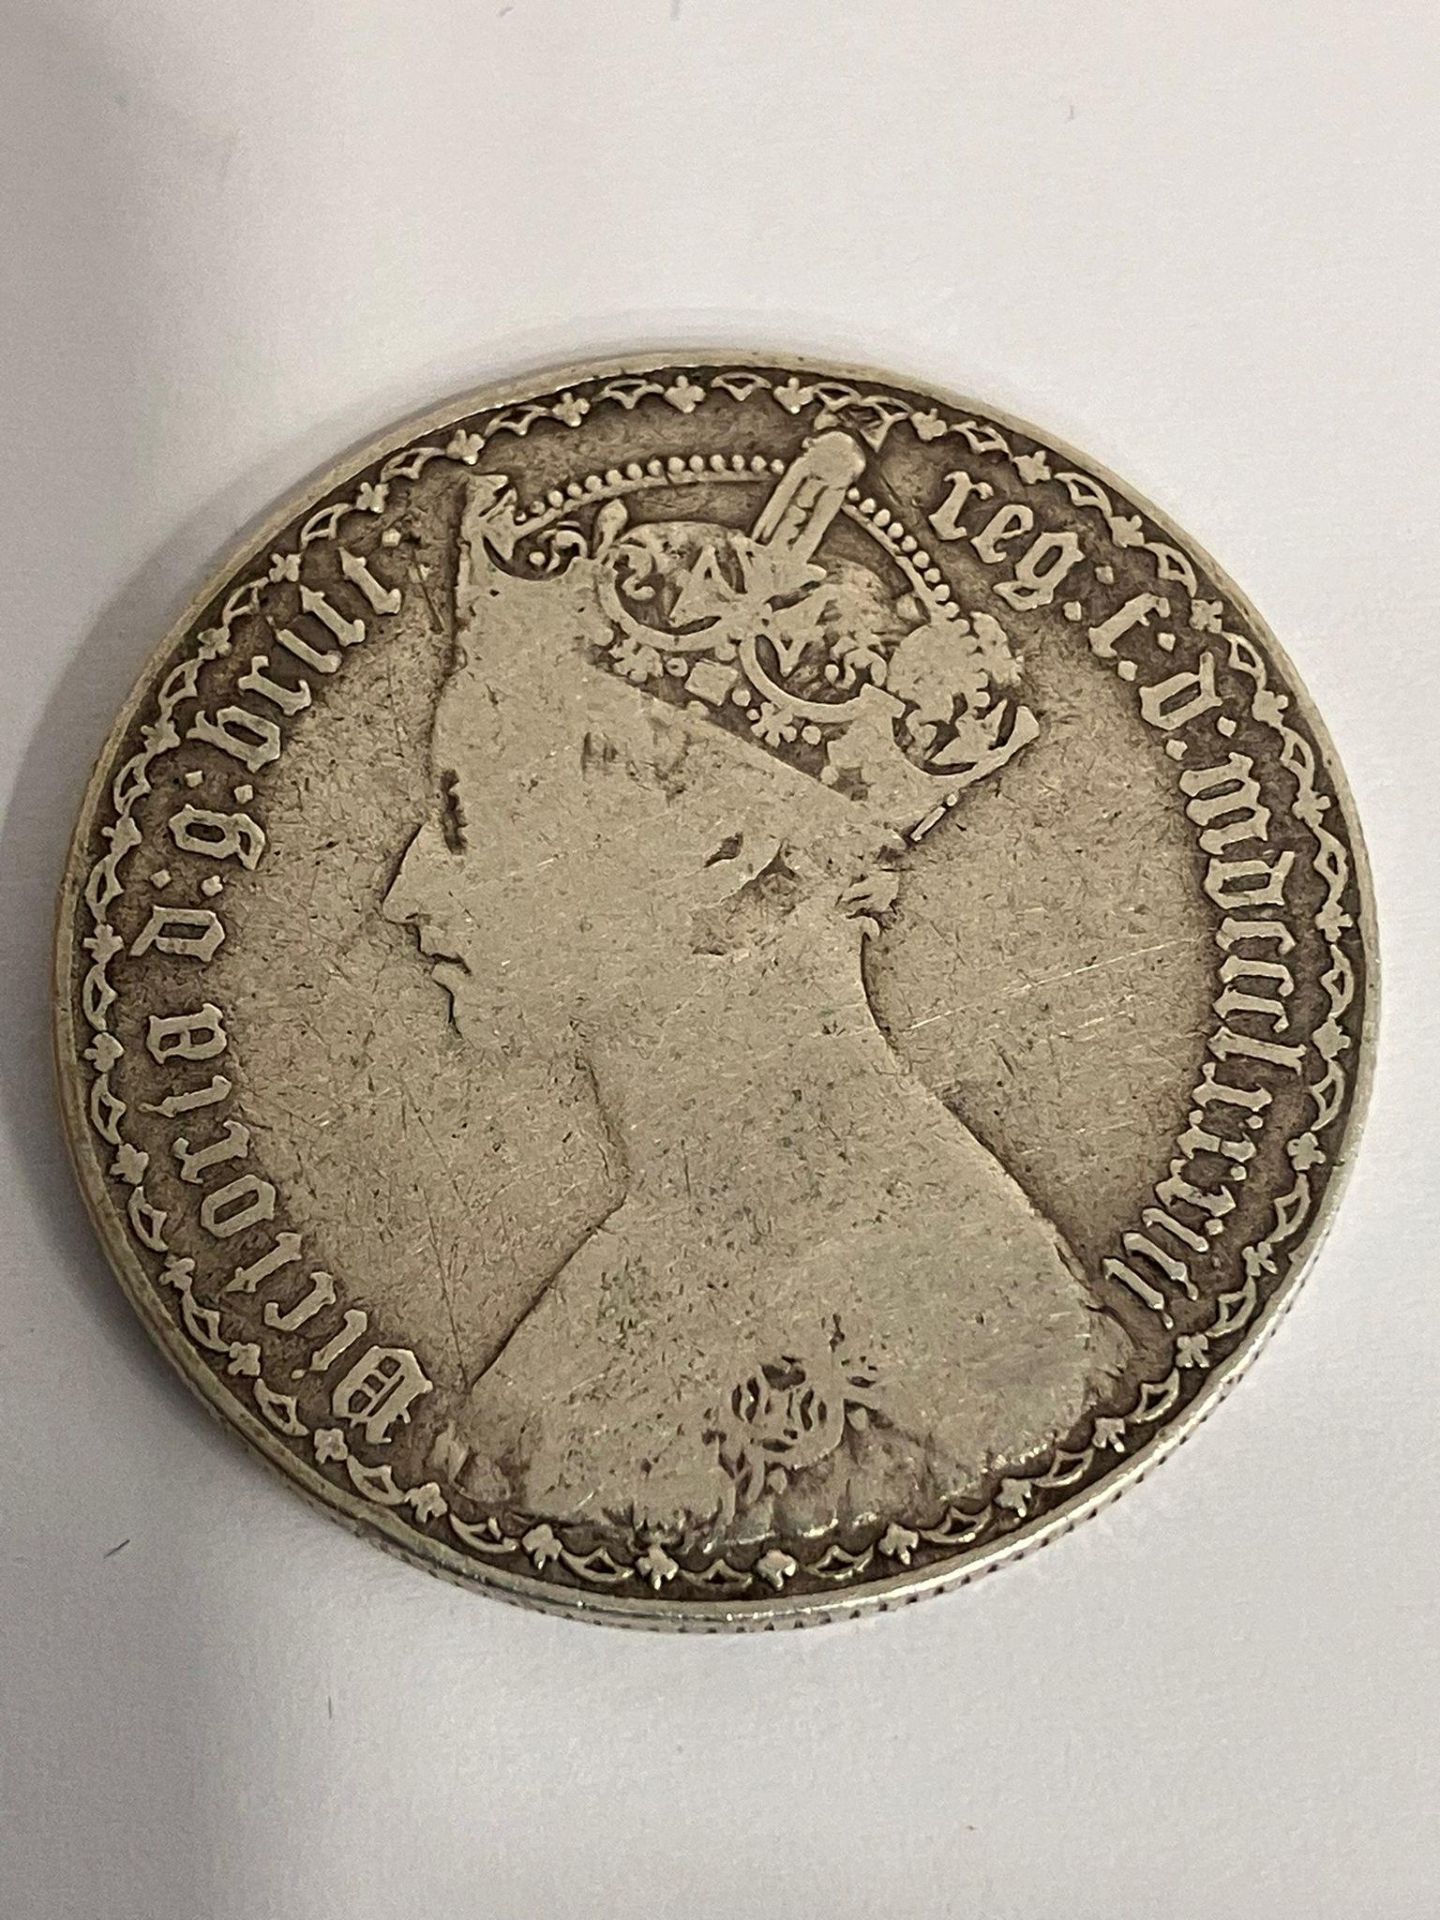 1883 SILVER GOTHIC FLORIN. Very fine/extra fine condition. - Image 3 of 3